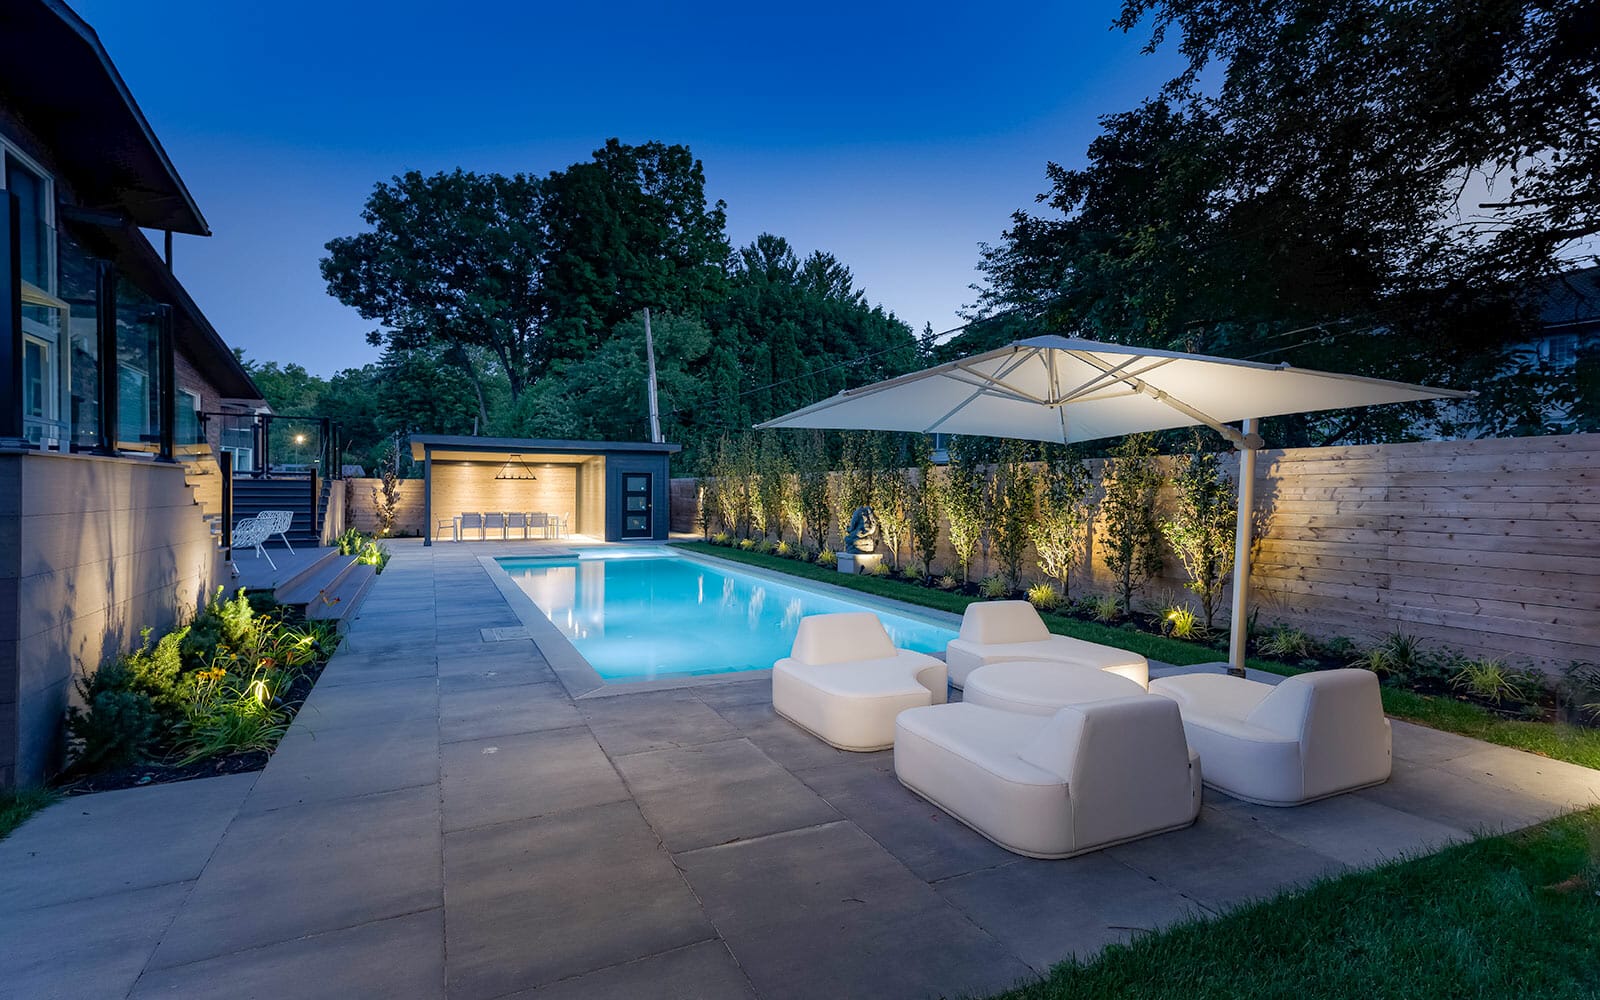 Toronto Landscaping Company Delivers Complete Landscape Design: Concrete Pool construction, Interlocking, Gazebo, PVC Decking, and Privacy Fence